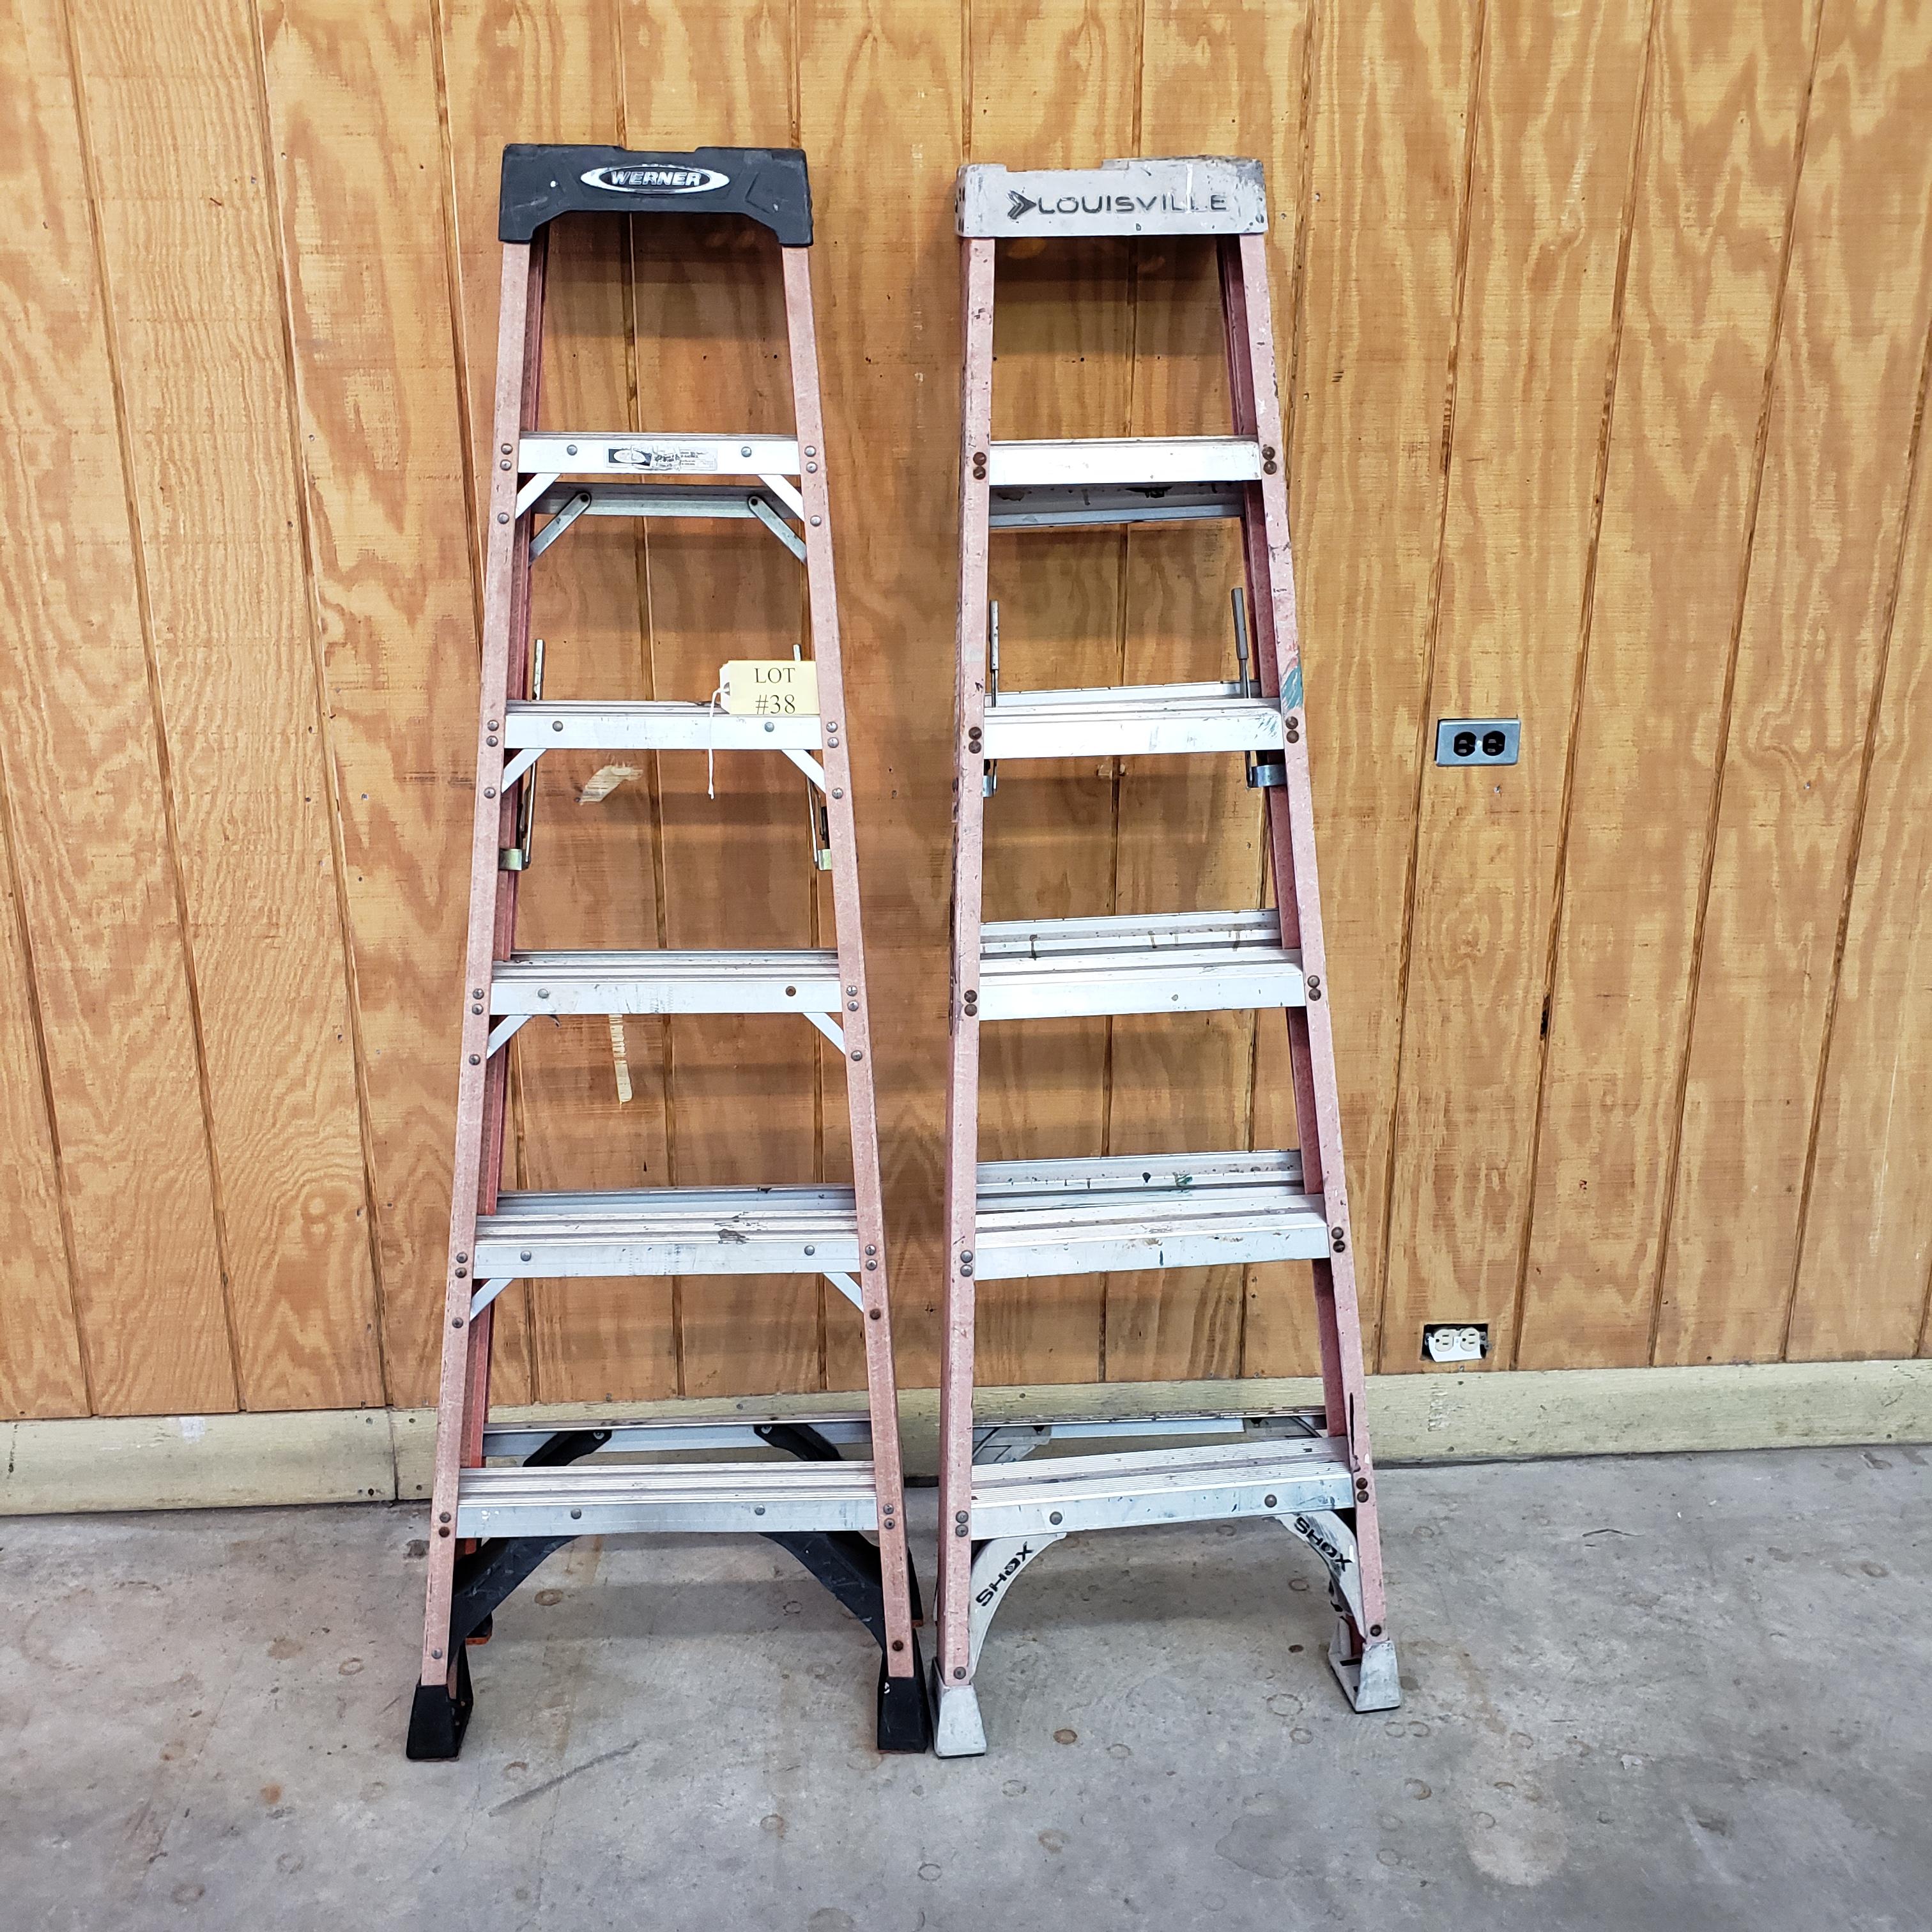 (2) WERNER AND LOUISBILLE 6' LADDERS